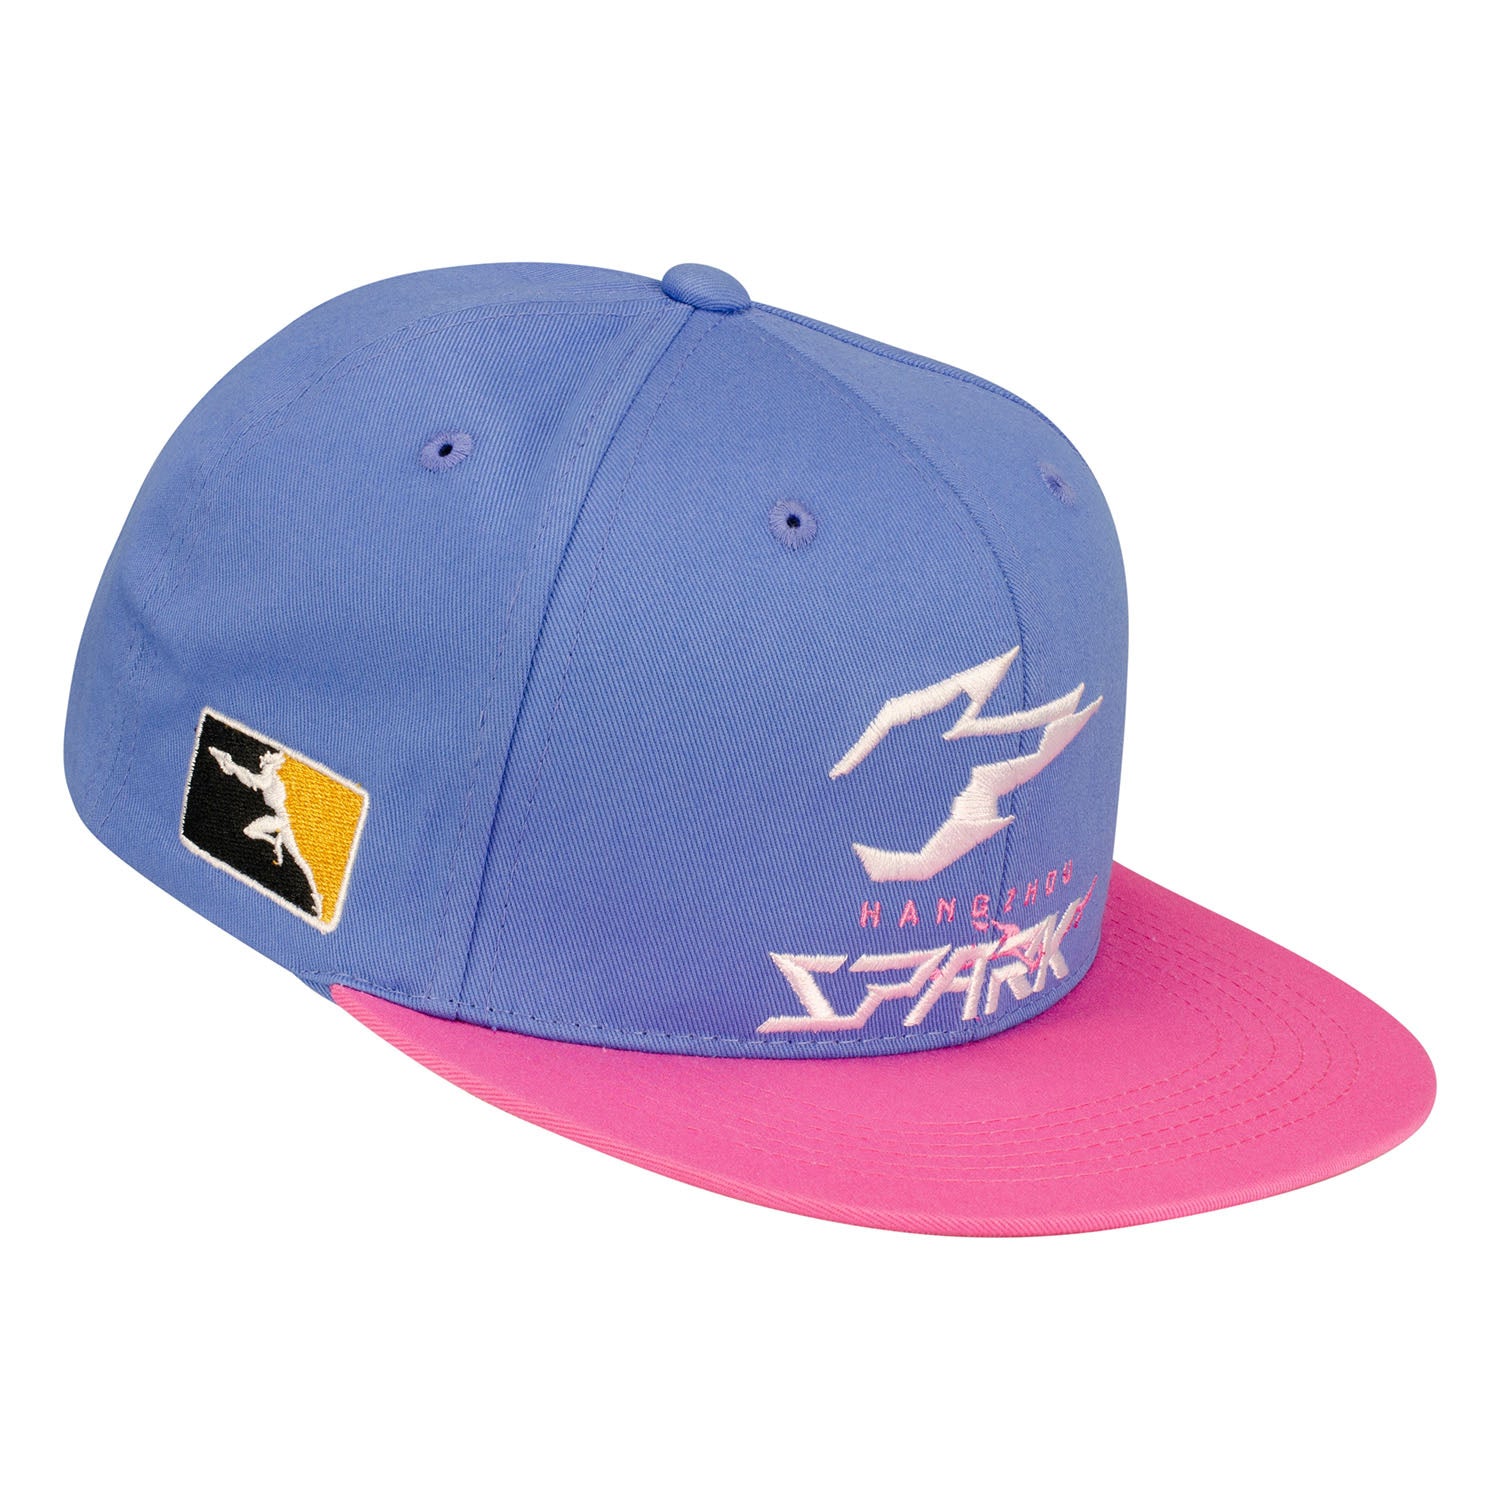 Hangzhou Spark Blue Snapback Hat - Right View